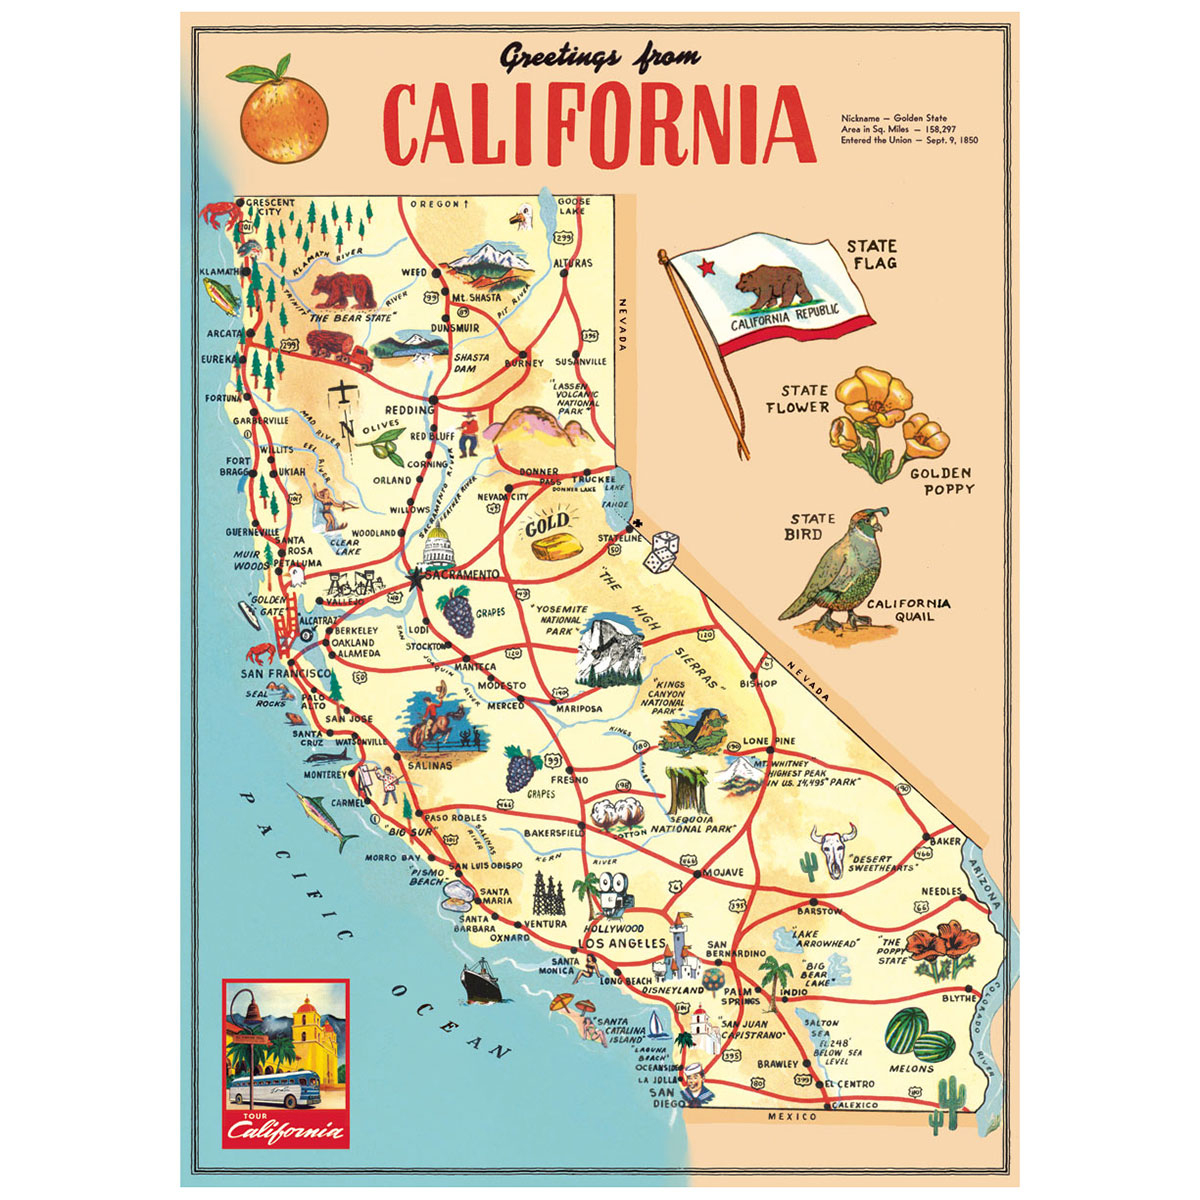 California Sightseeing Map Vintage Style Poster At Retro Planet - California Sightseeing Map